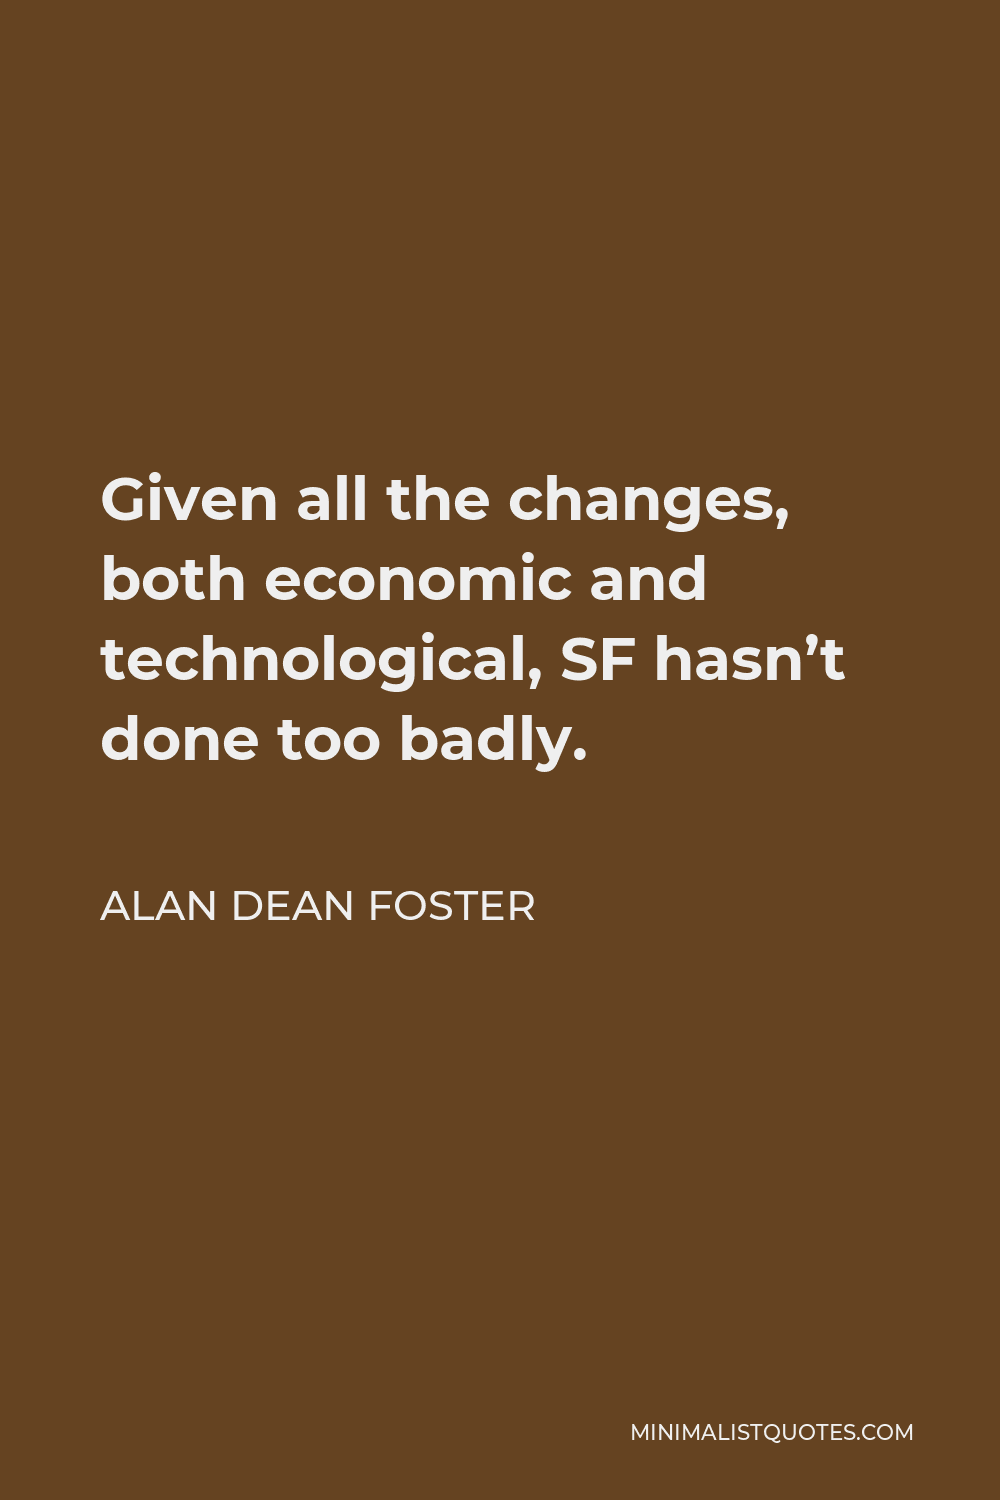 Alan Dean Foster Quote - Given all the changes, both economic and technological, SF hasn’t done too badly.